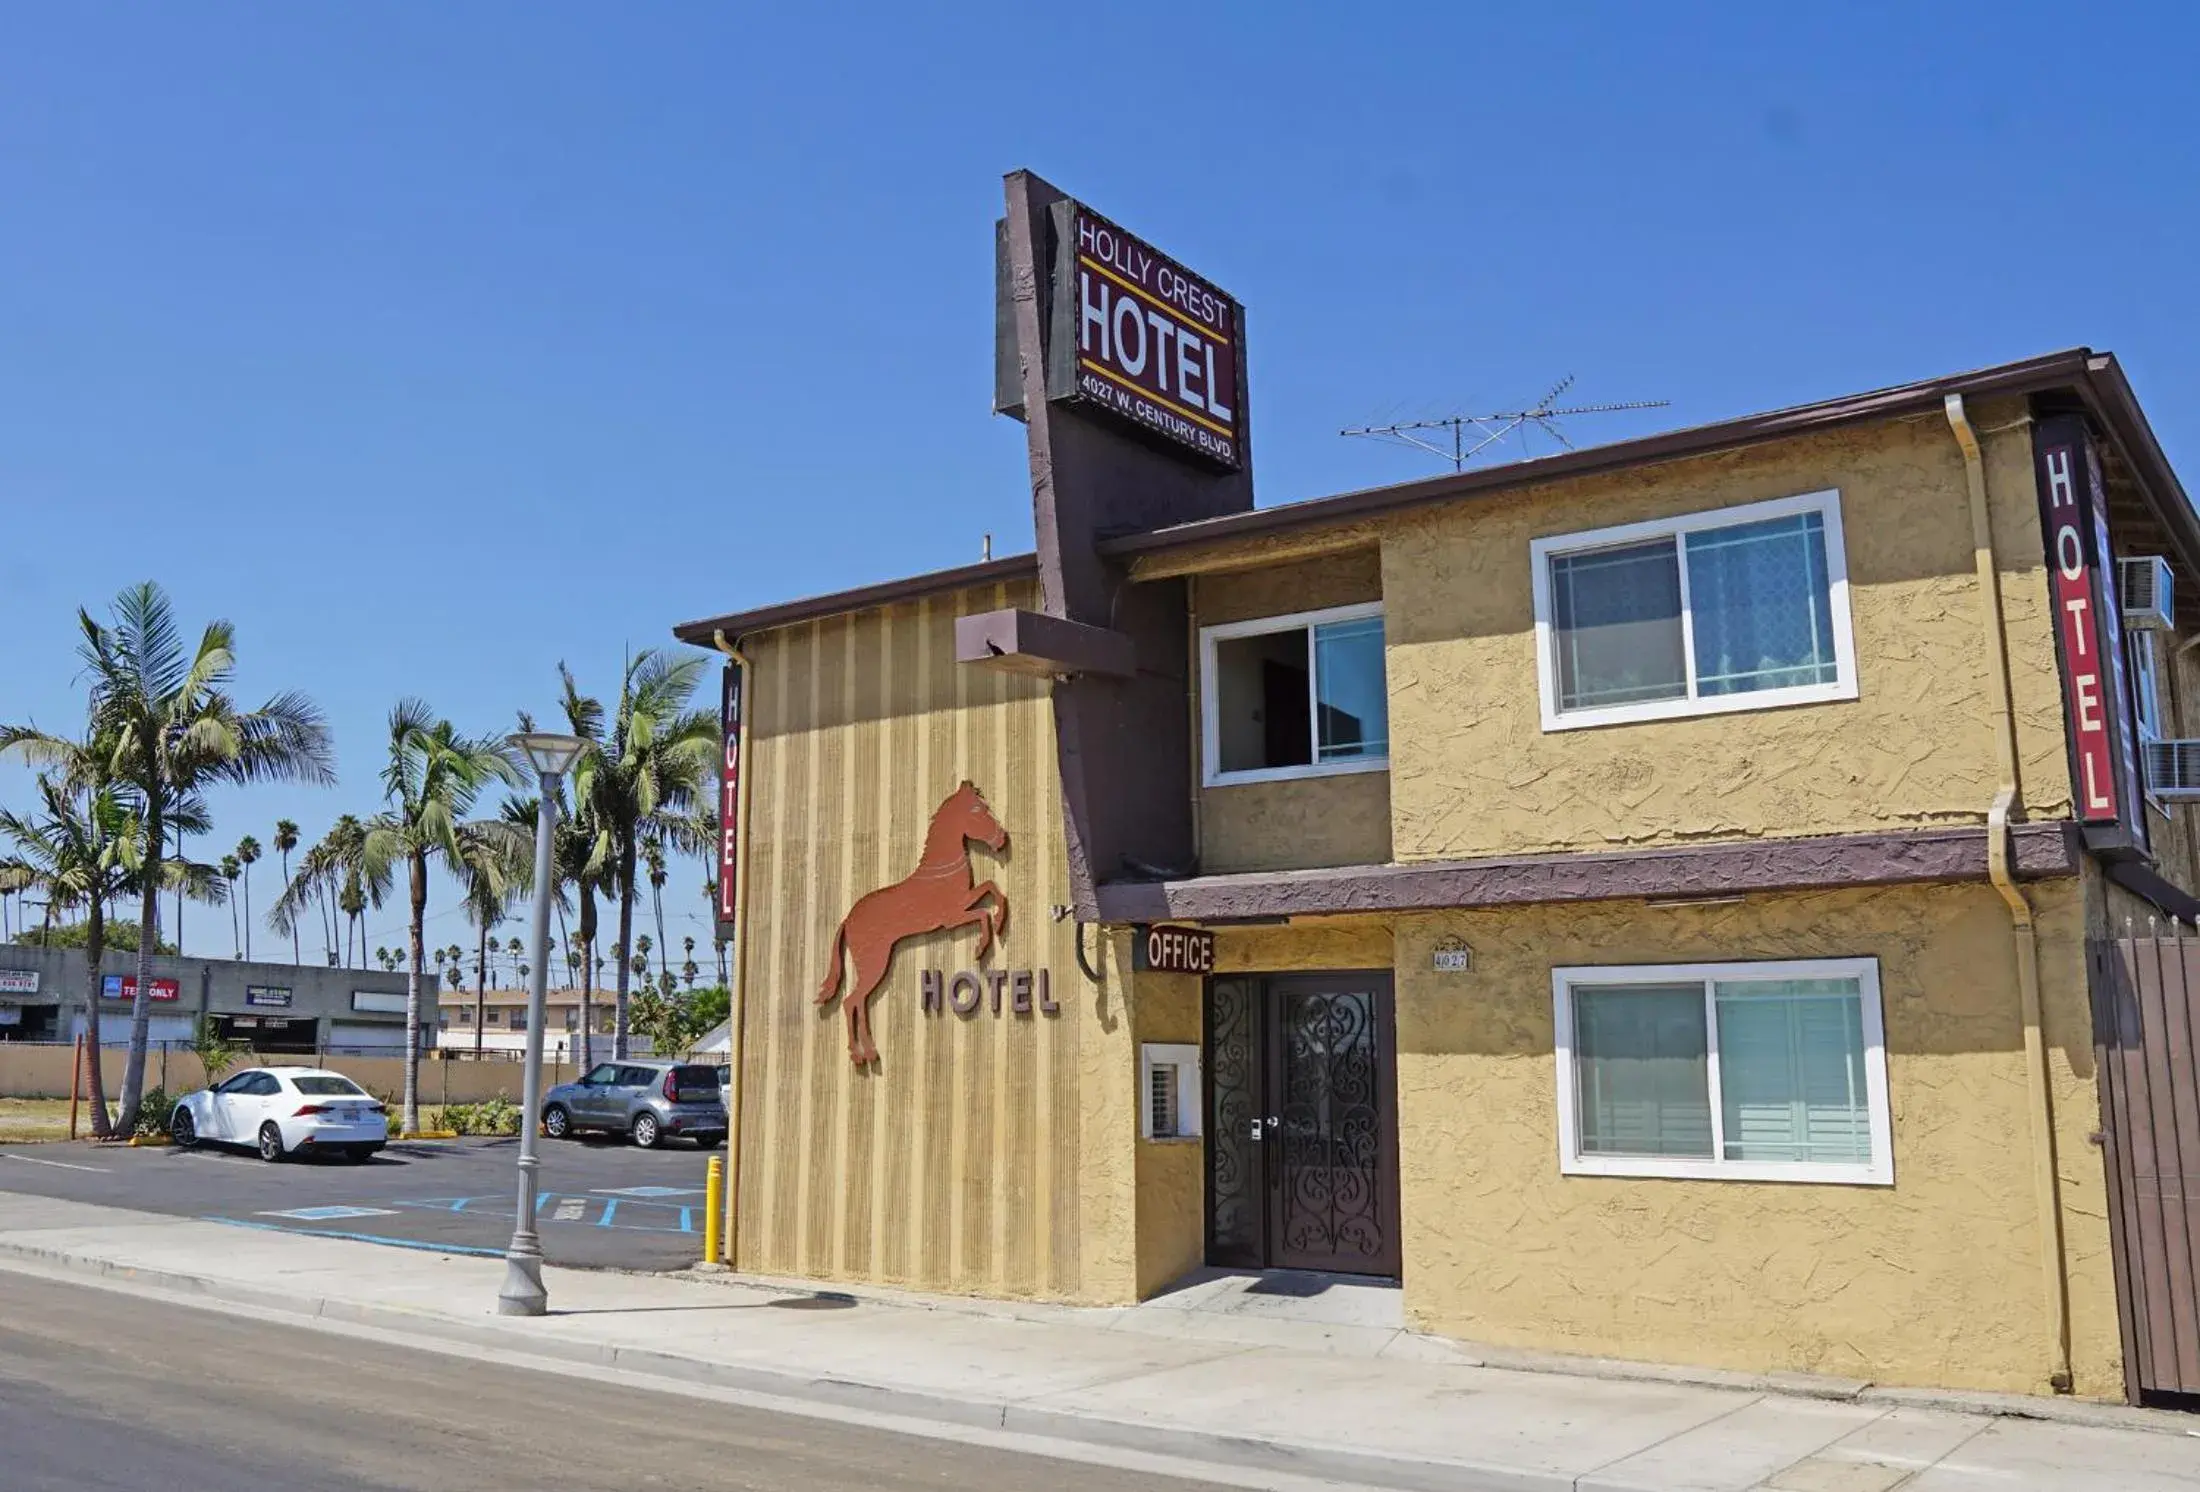 Property Building in Holly Crest Hotel - Los Angeles, LAX Airport